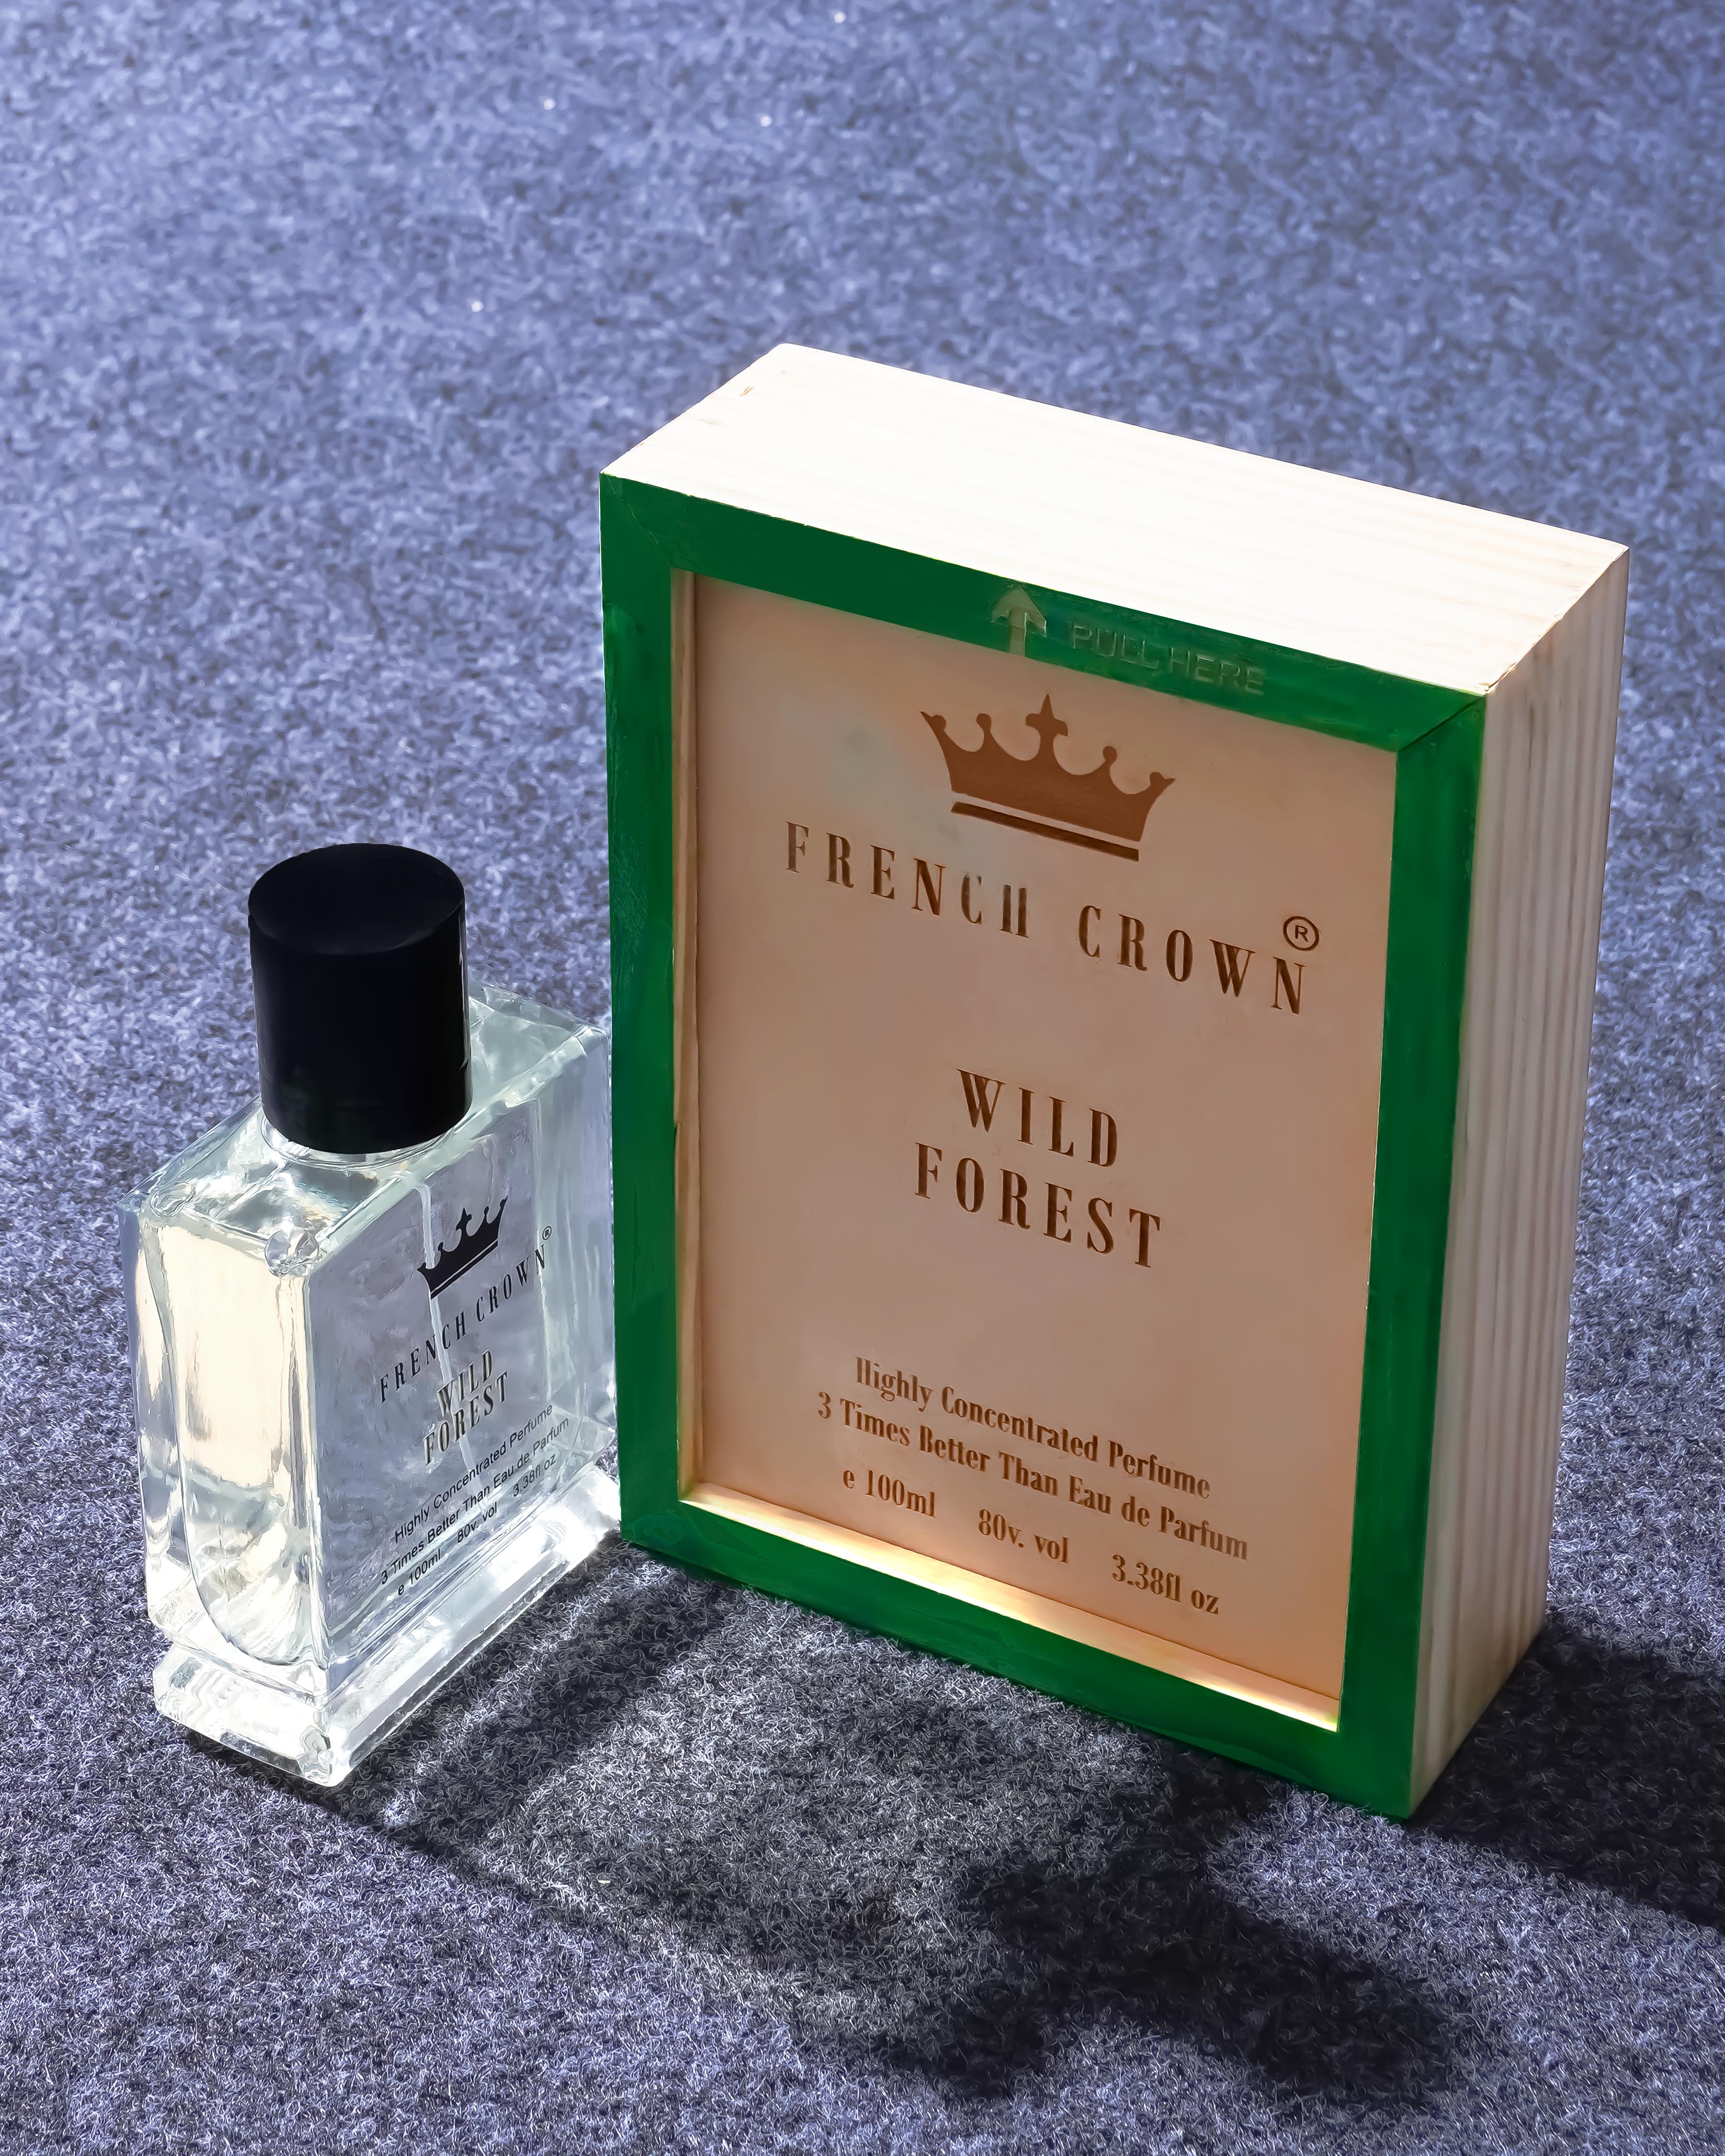 French Crown Icy Mint and Wild Forest Perfume Combo PFC006